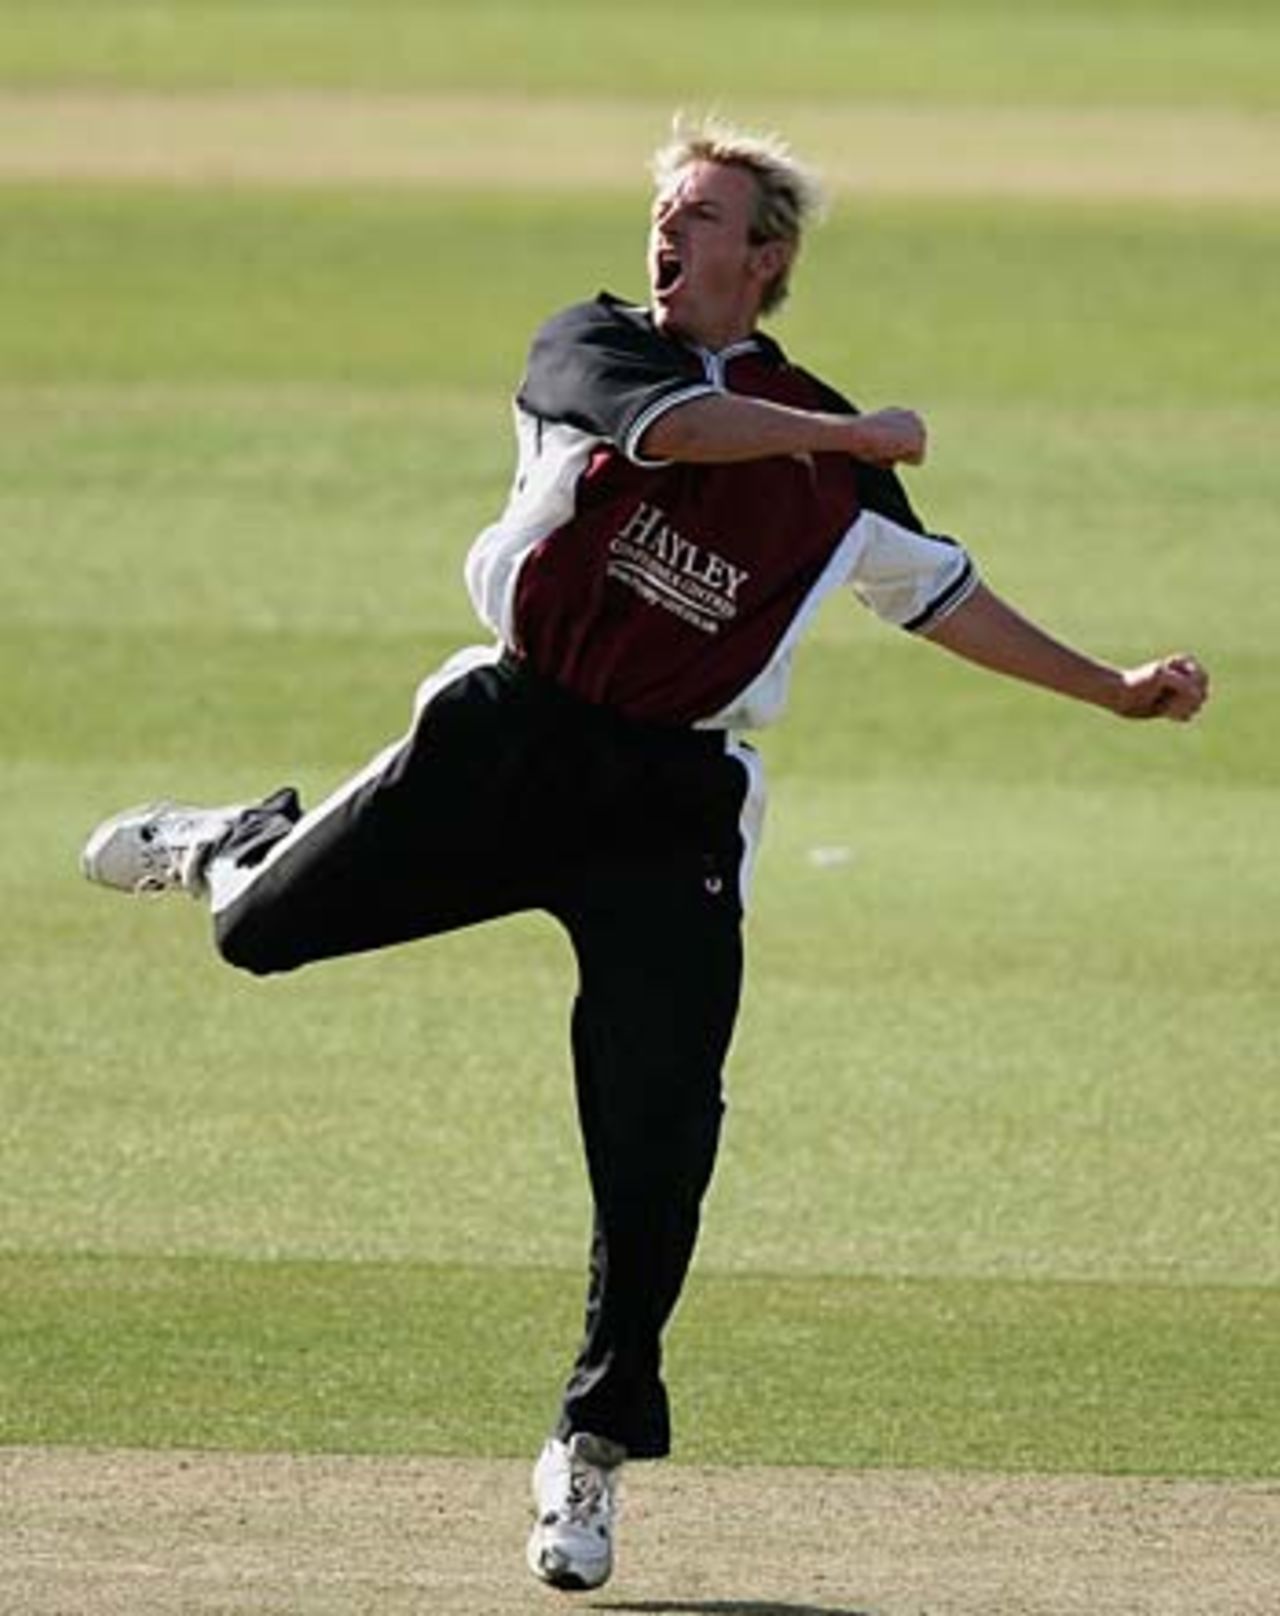 Damien Wright celebrates one of his four wickets, Middlesex v Northamptonshire, C&G Trophy, Lord's, May 17